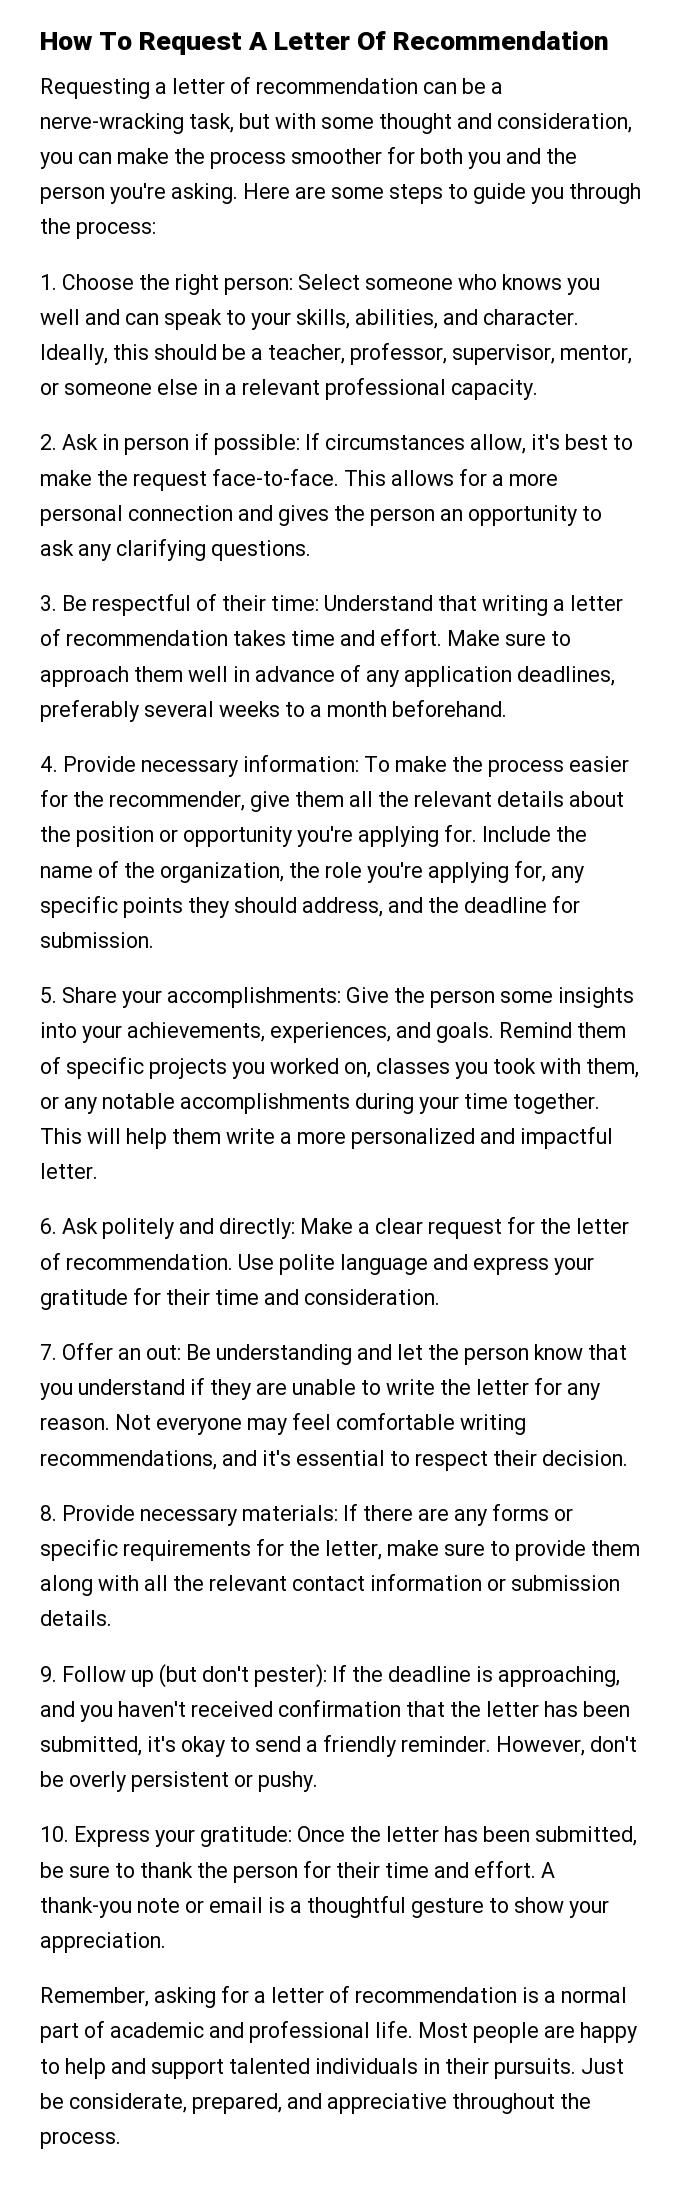 How To Request A Letter Of Recommendation